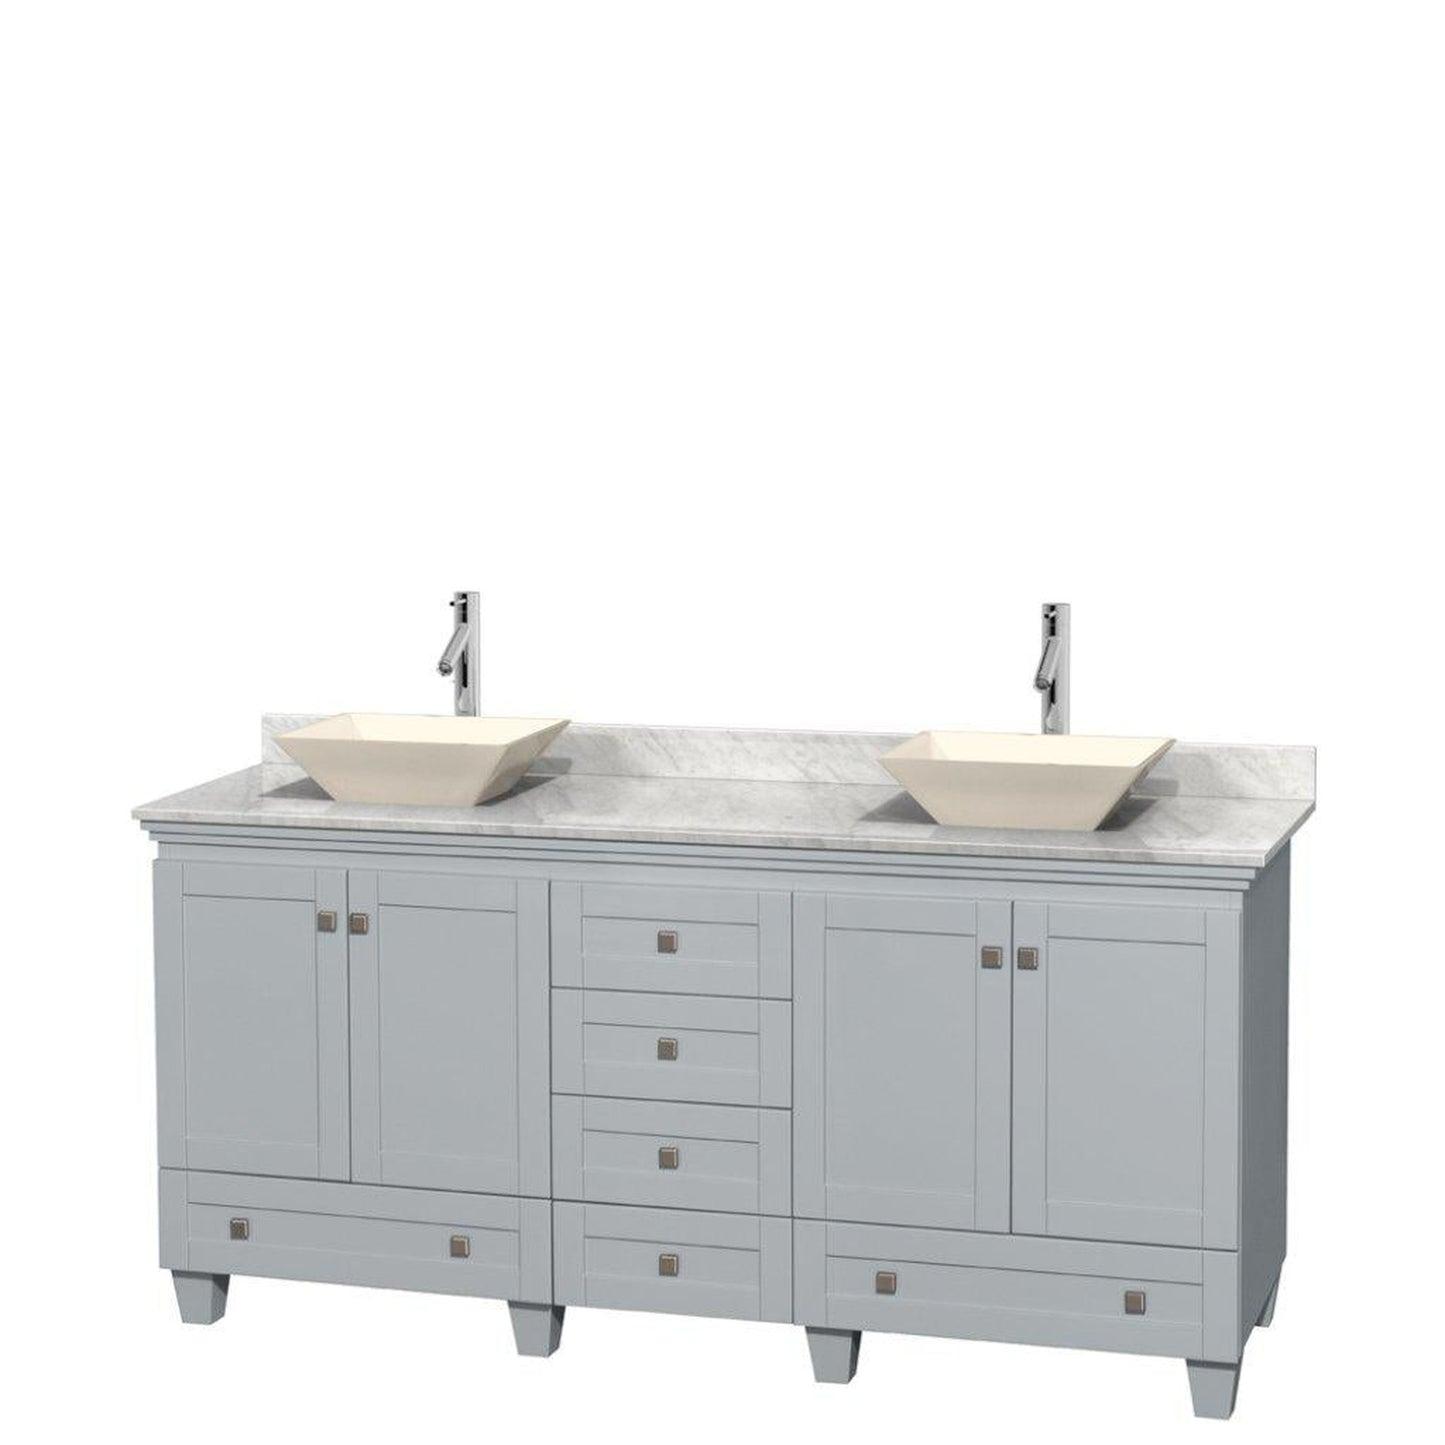 Wyndham Collection Acclaim 72" Double Bathroom Oyster Gray Vanity With White Carrara Marble Countertop And Pyra Bone Porcelain Sinks